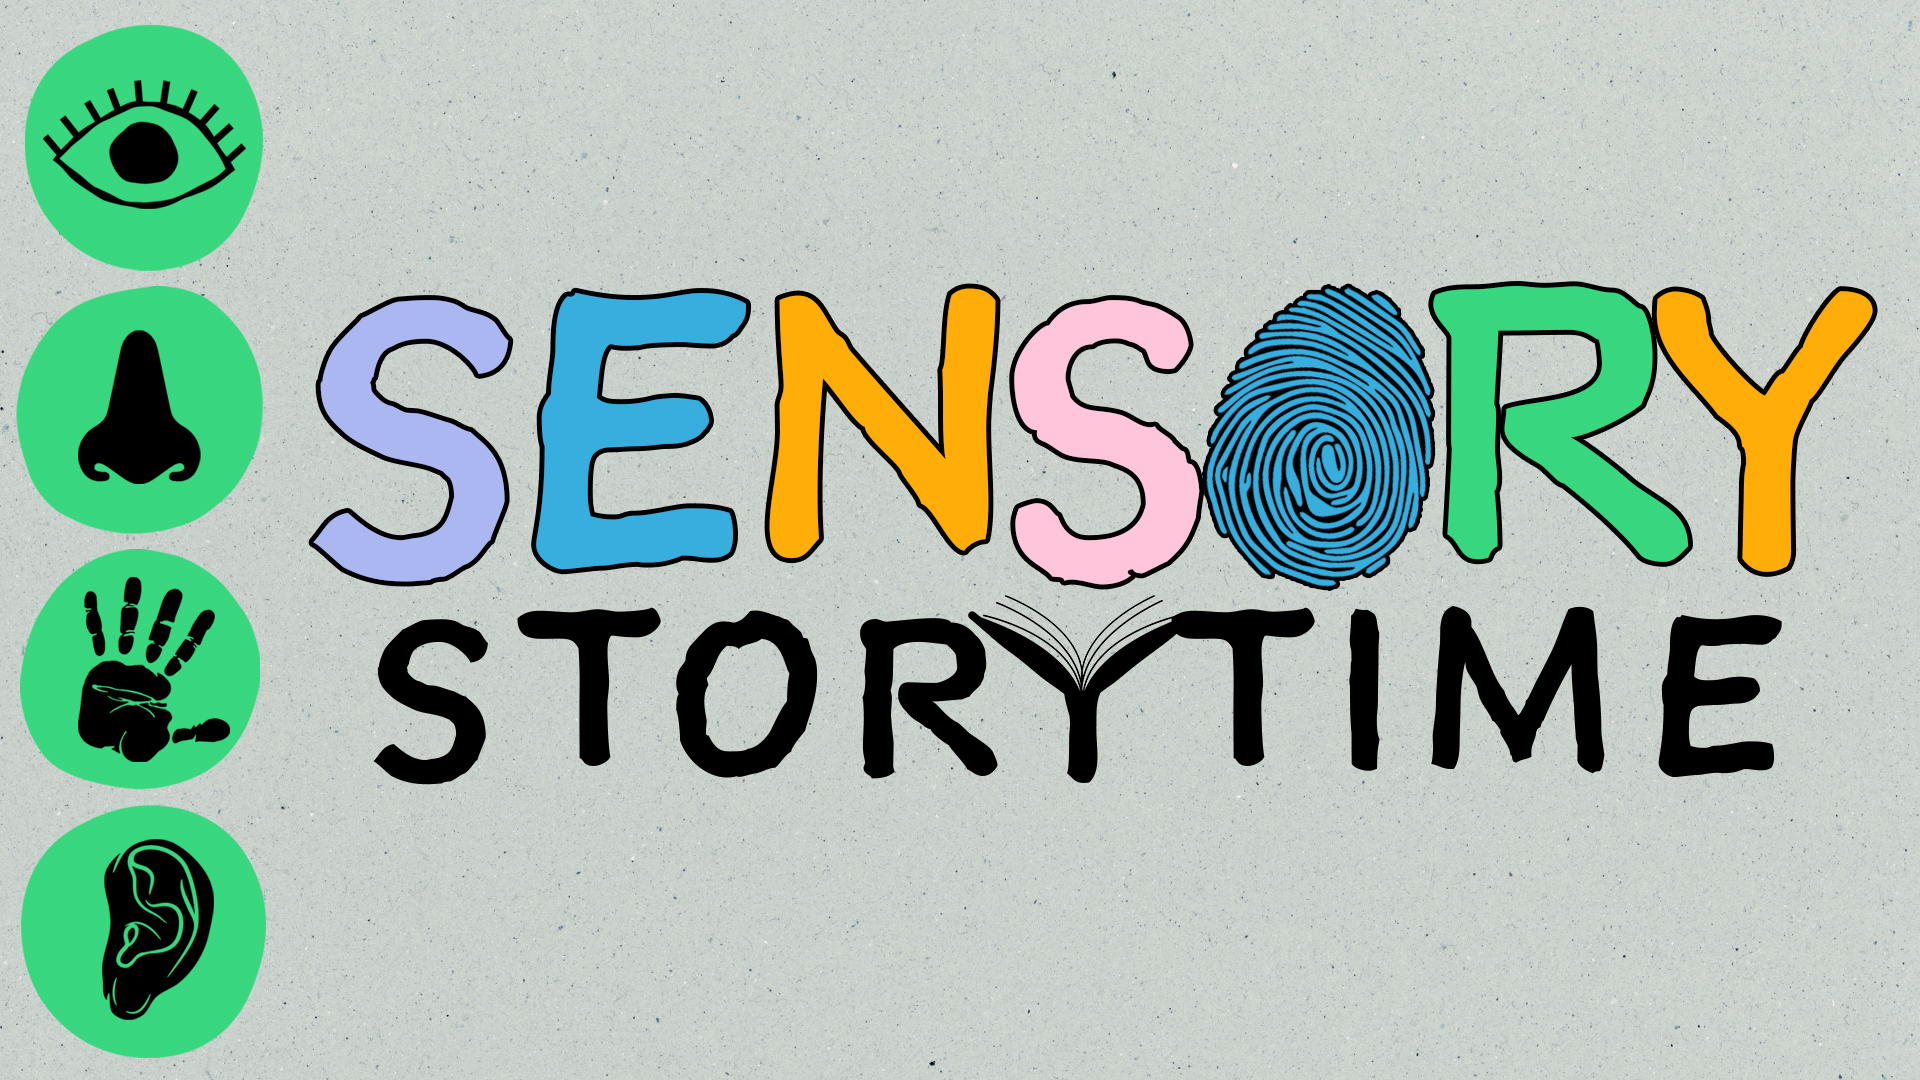 Image reads "Sensory Storytime" against a grey background. The "o" in Sensory is a fingerprint and the "y" in Storytime is an open book. To the left of the title are three green circles with icons of the senses in them. From top to bottom the icons are an eye, a nose, a hand, and an ear.